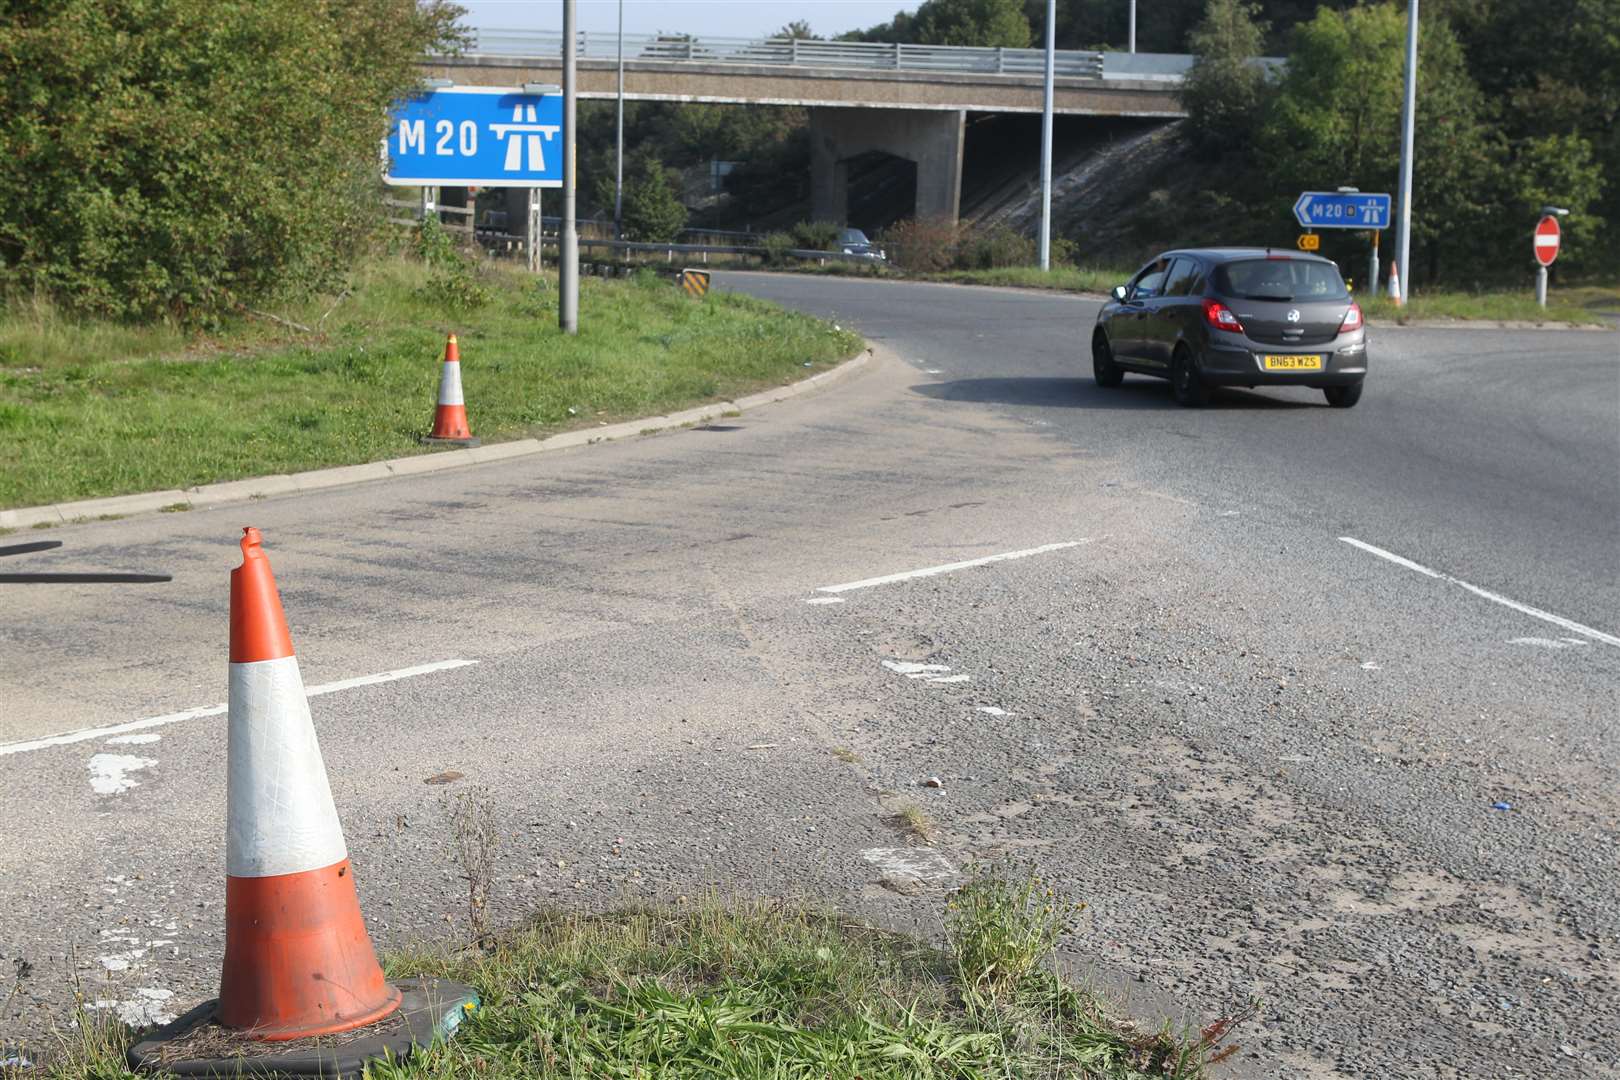 The scene of the accident, near the Ashford road on the approach to the M20 motorway. Picture: John Westhrop